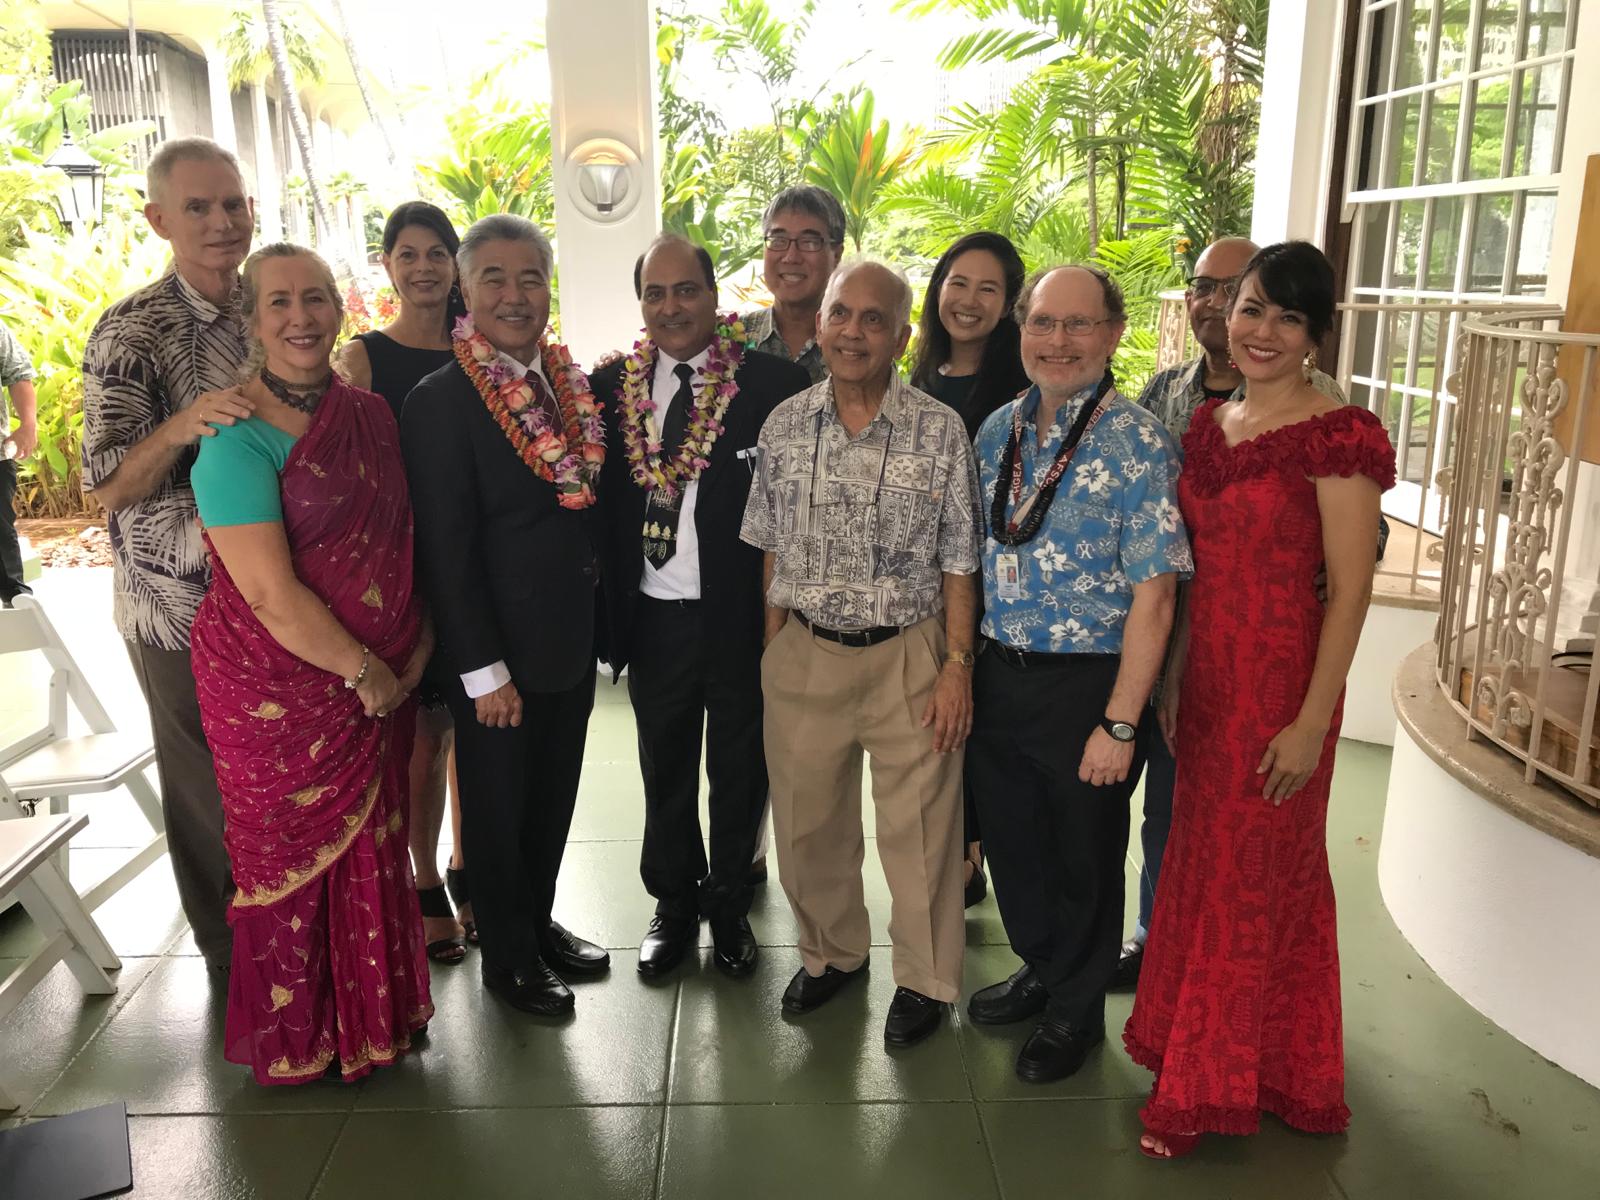 GIIP members attended the signing ceremony of Sister State Relationship between Hawaii and Goa, India and met with Hon. Governor, David Y. Ige and First Lady, Dawn Ige at Washington place in Honolulu in September 2018.